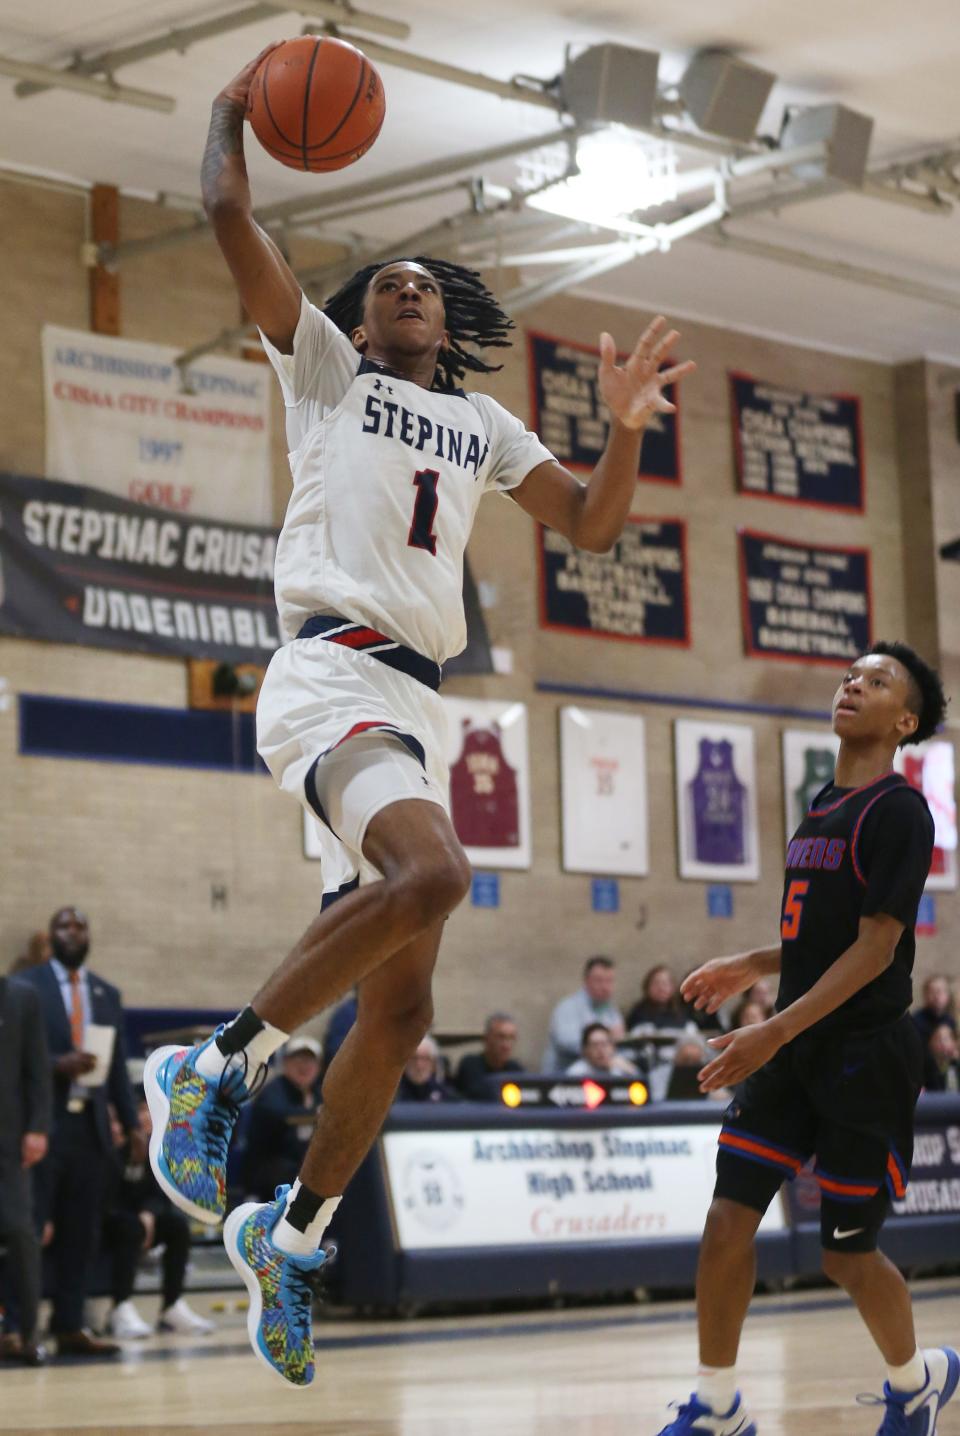 Stepinac's Boogie Fland (1) goes up for a shot against Saint Raymond during boys basketball action at Stepinac High School in White Plains Jan. 20, 2023. Stepinac won the game 89-87 in overtime. Fland finished the game with 40-points.